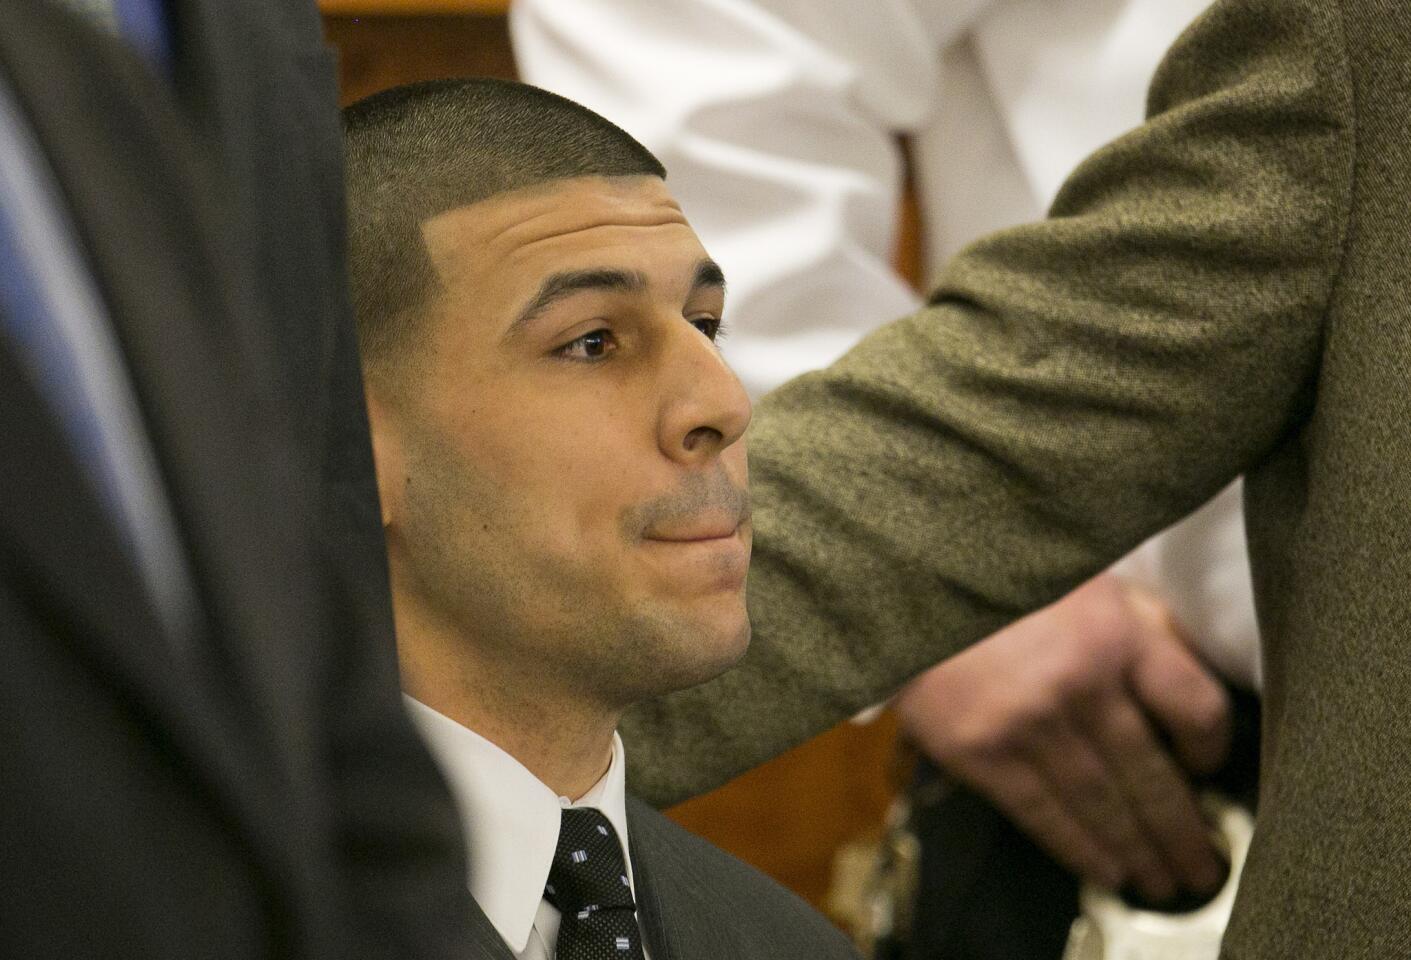 Former New England Patriots football player Aaron Hernandez listens as the guilty verdict is read during his murder trial, Wednesday, April 15, 2015 at Bristol County Superior Court in Fall River, Mass. Hernandez was found guilty of first-degree murder in the shooting death of Odin Lloyd in June 2013. He faces a mandatory sentence of life in prison without parole.